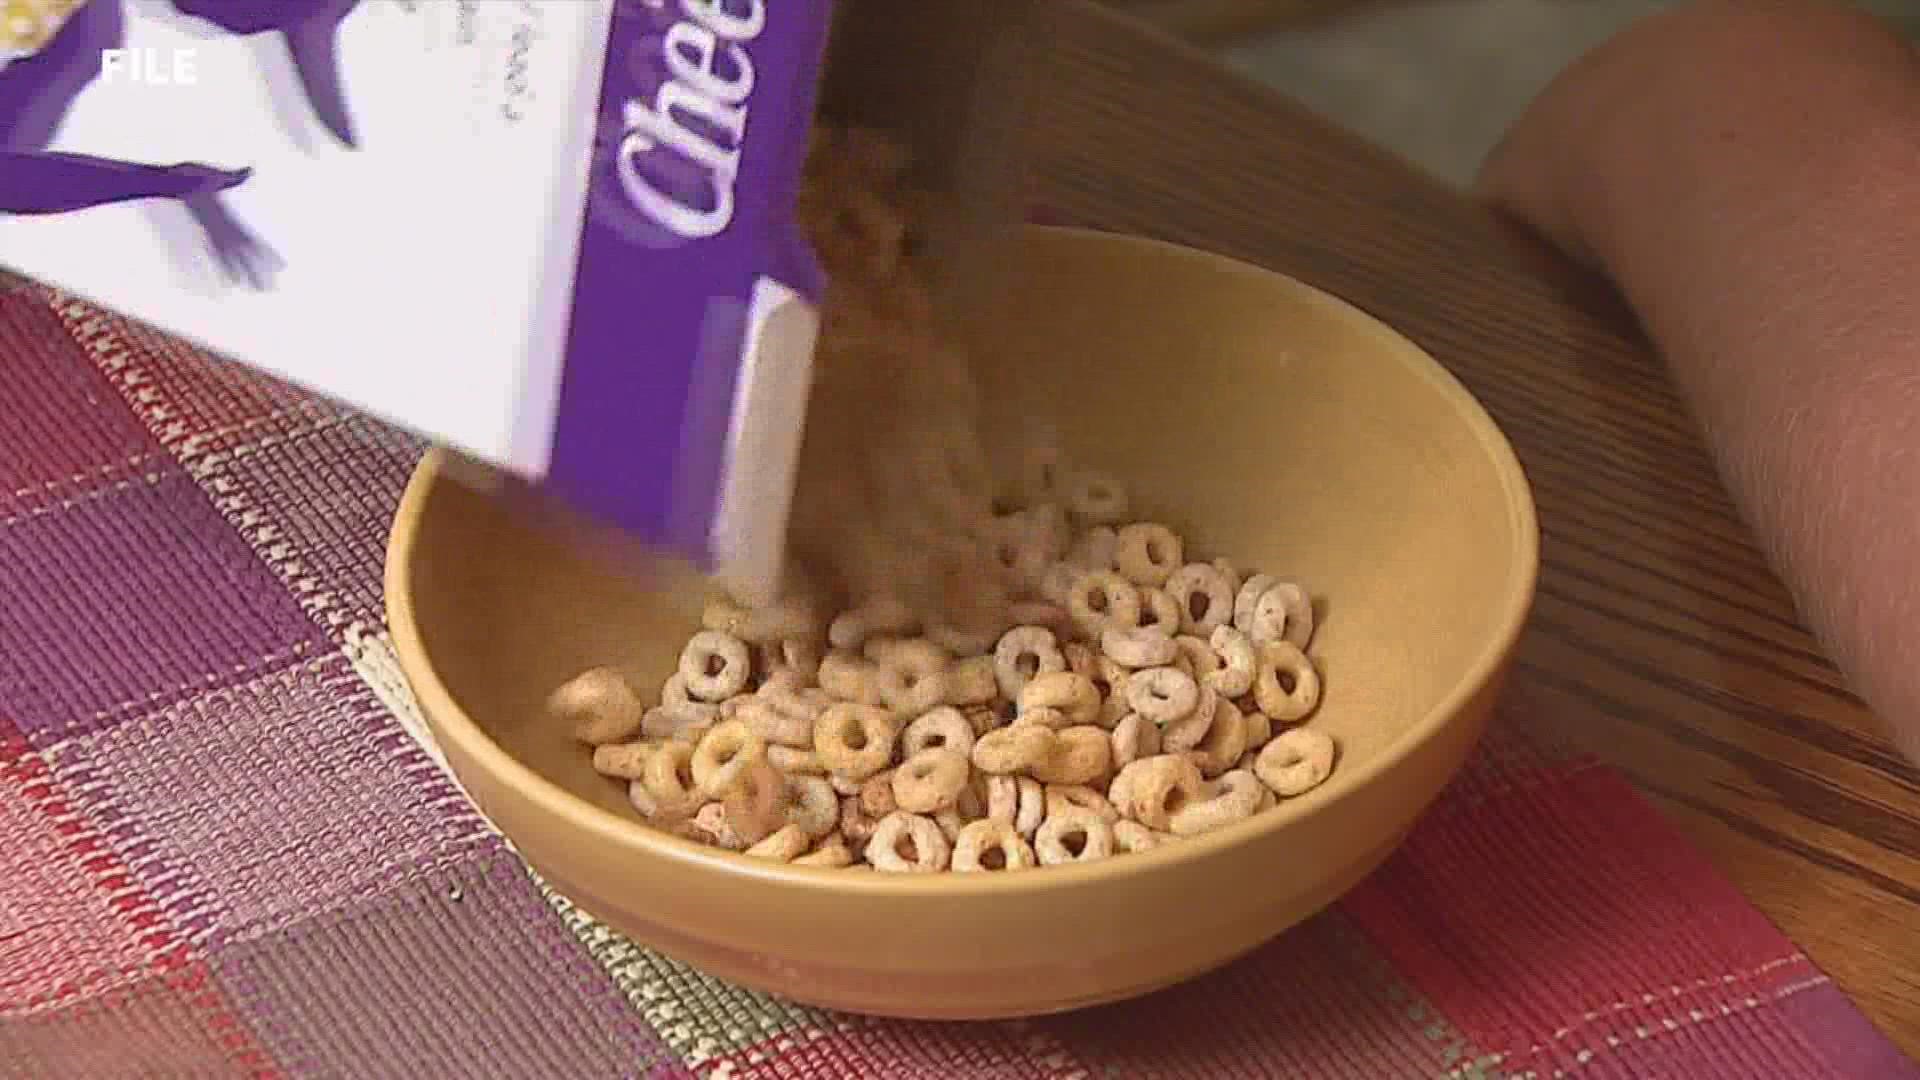 What does the Kellogg's strike mean for the local economy?